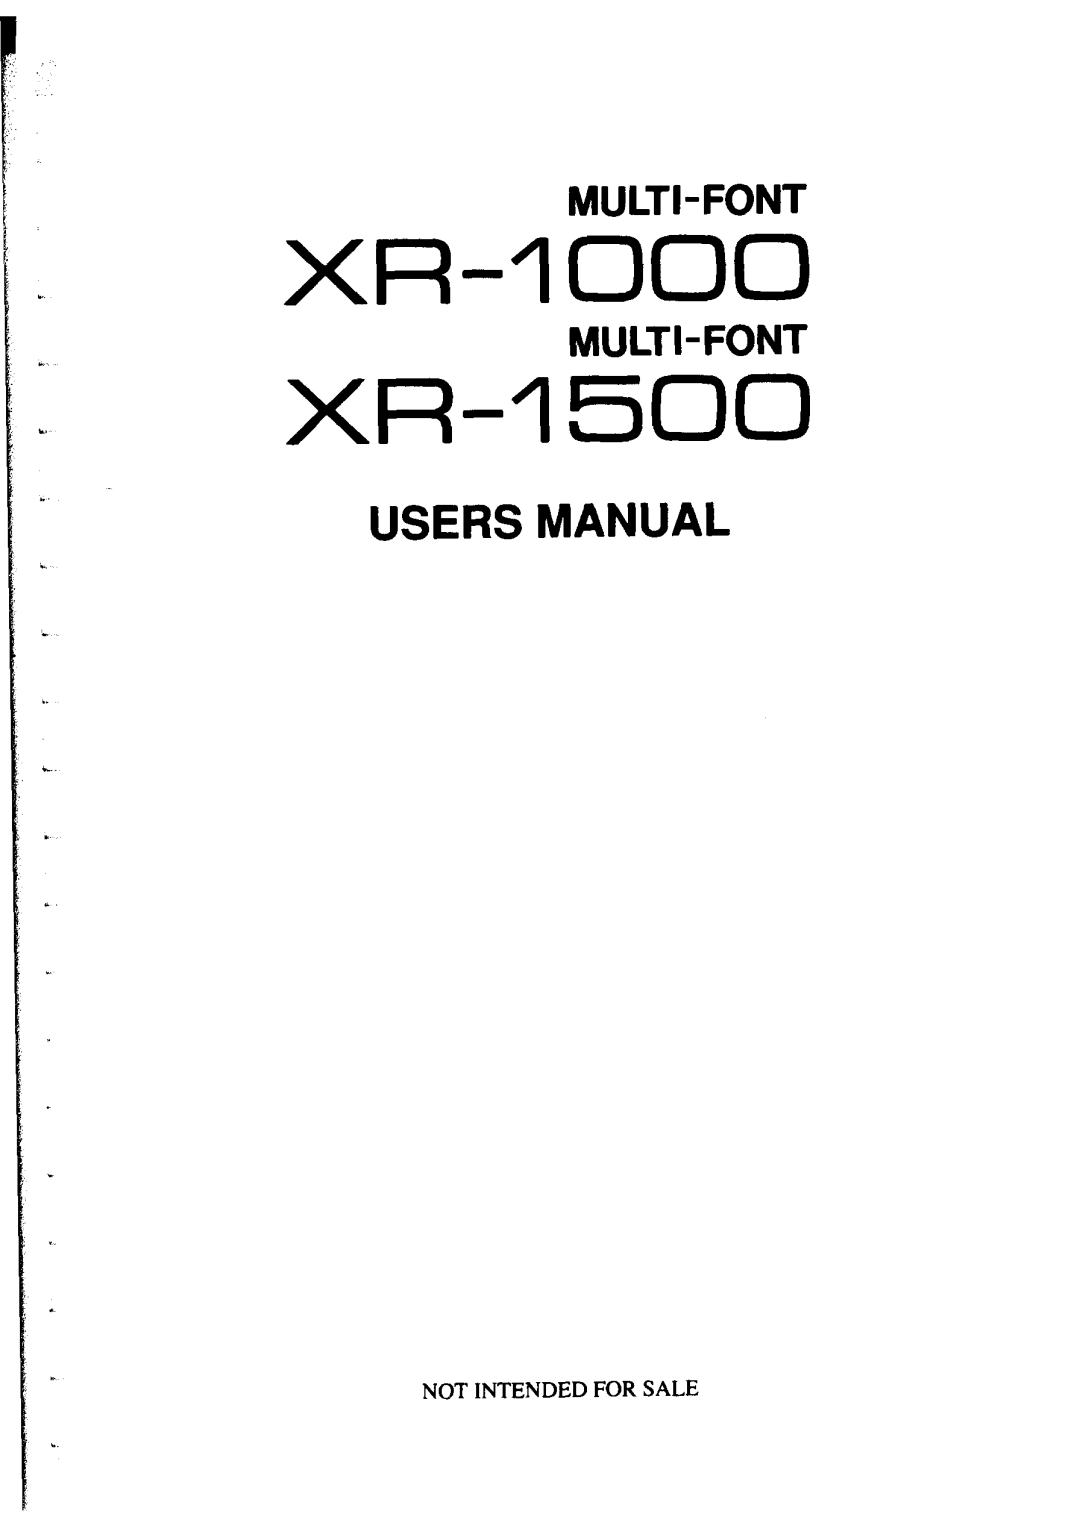 Star Micronics XR-1000 user manual Users Manual, XR-1500, Multi-Font, Not Intended For Sale 